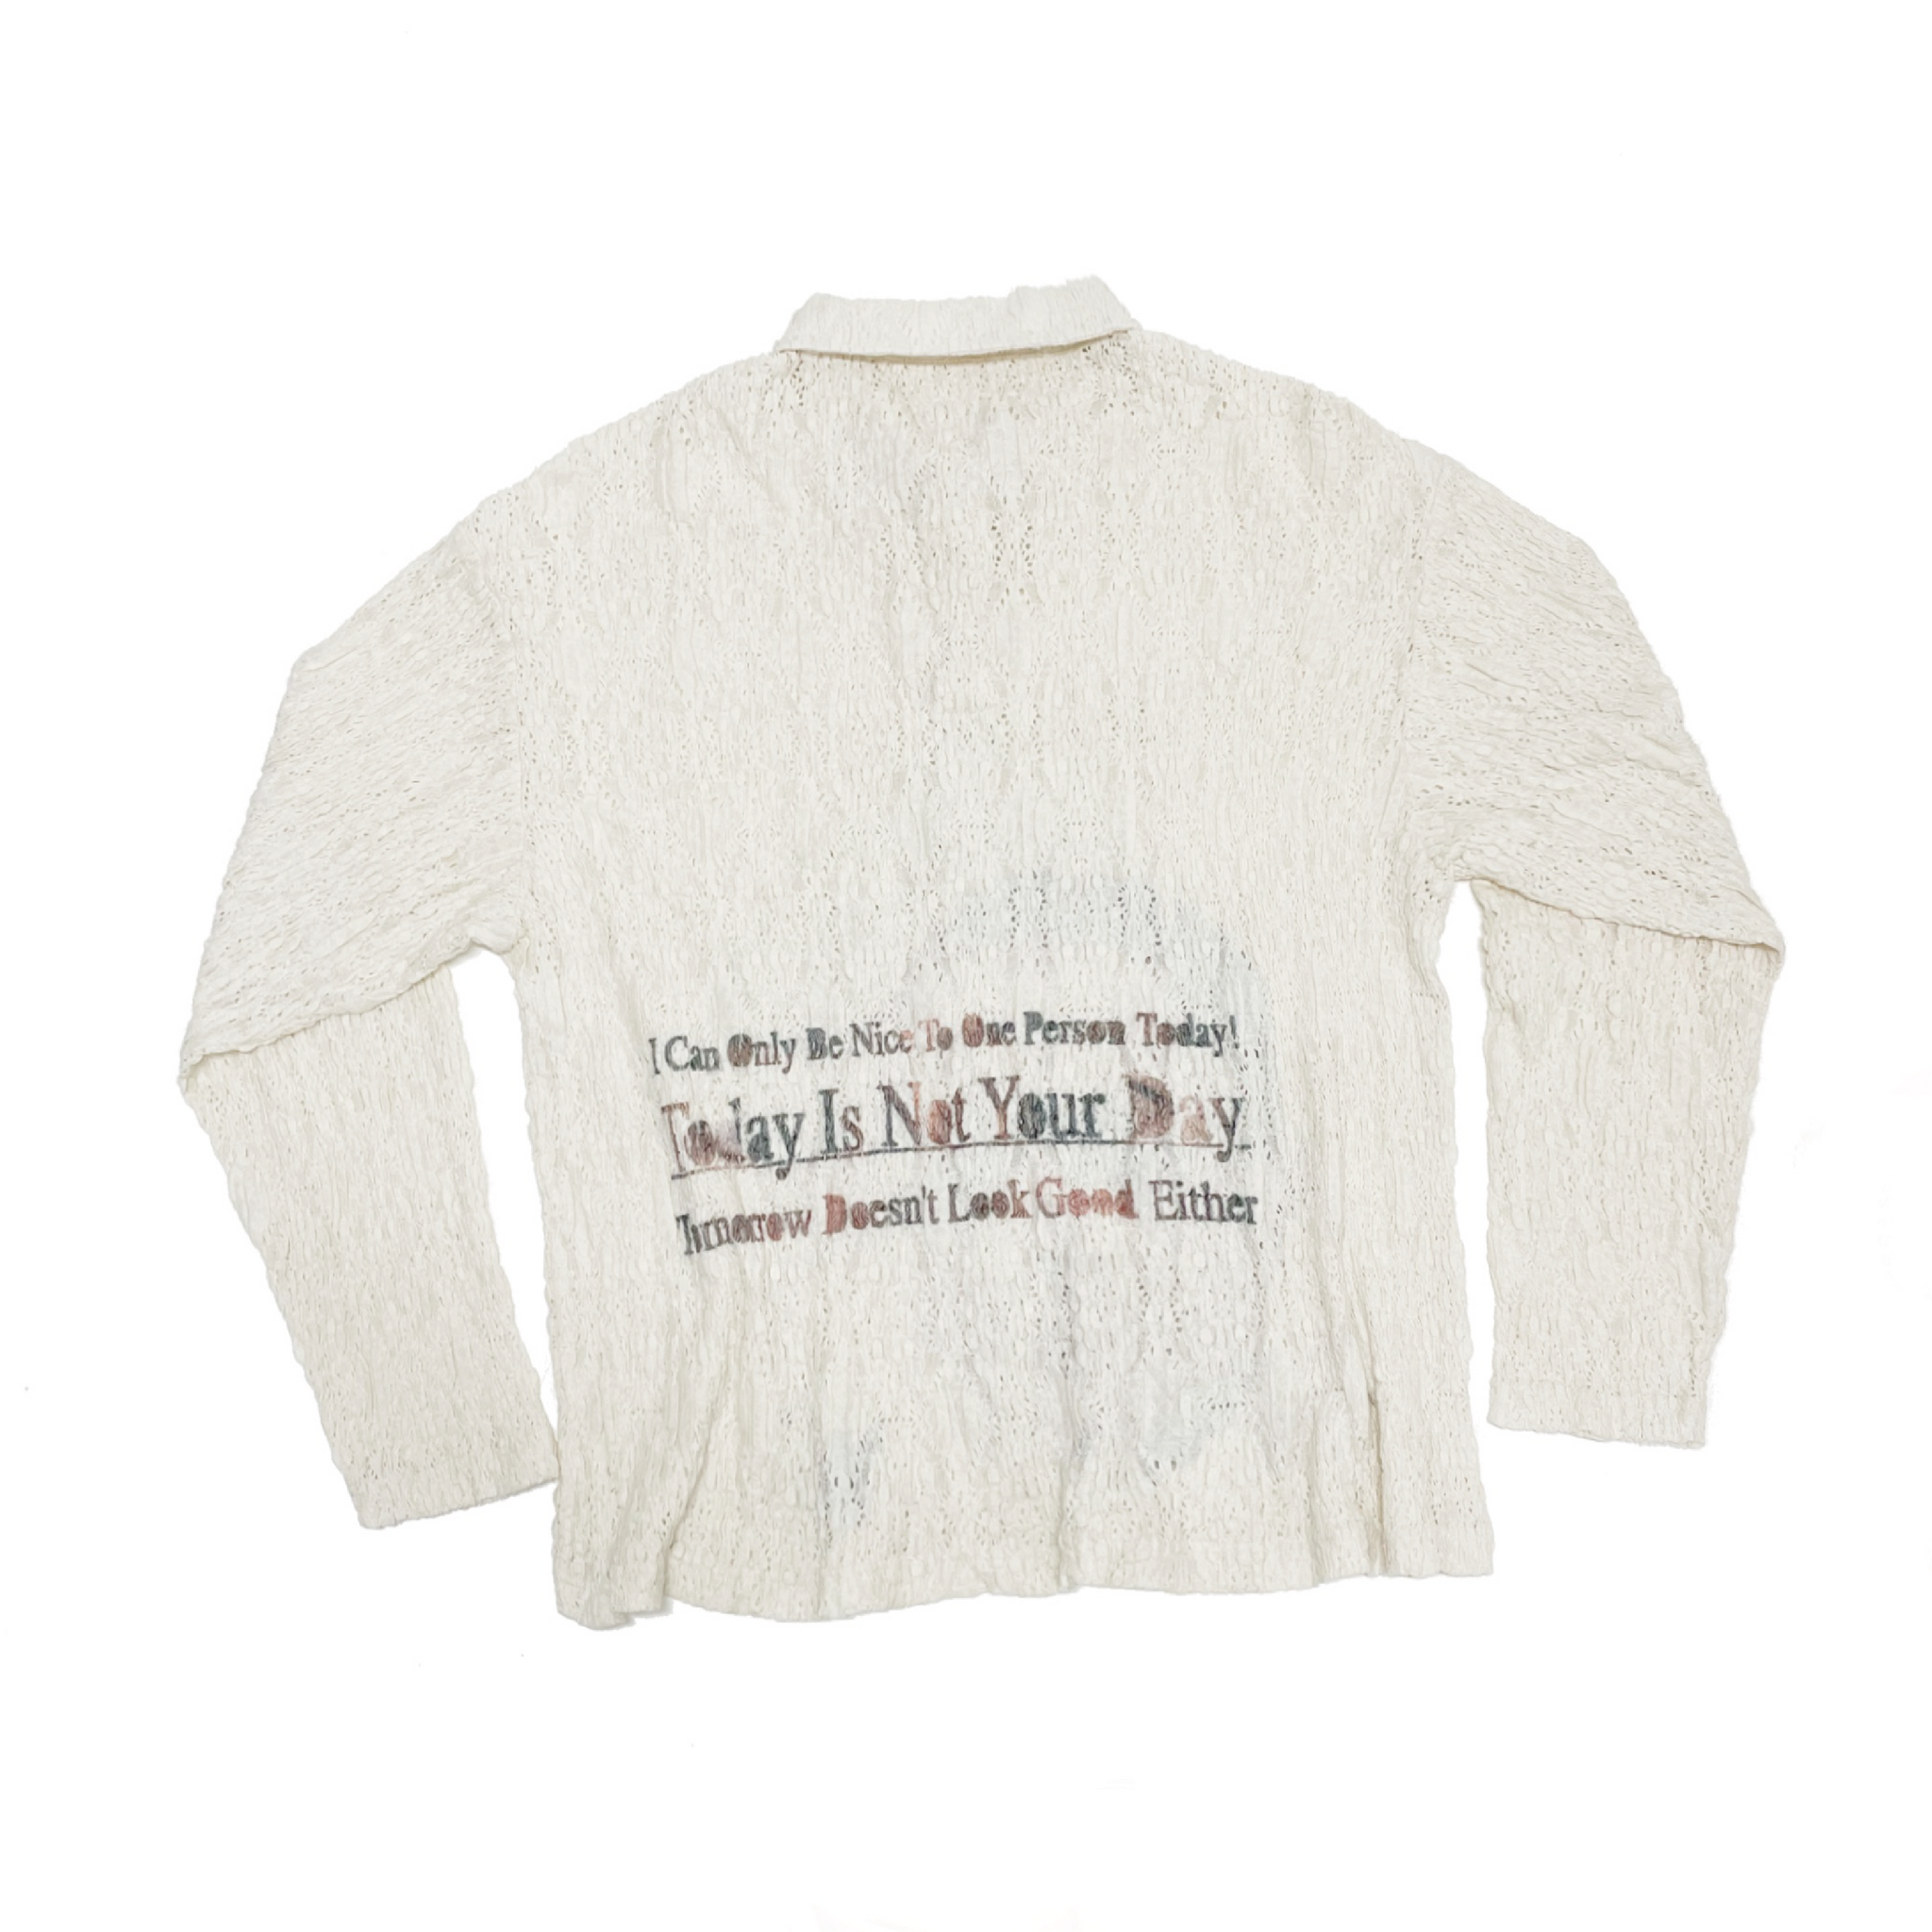 604 Service - This Is Not Your Day Collar Shirt